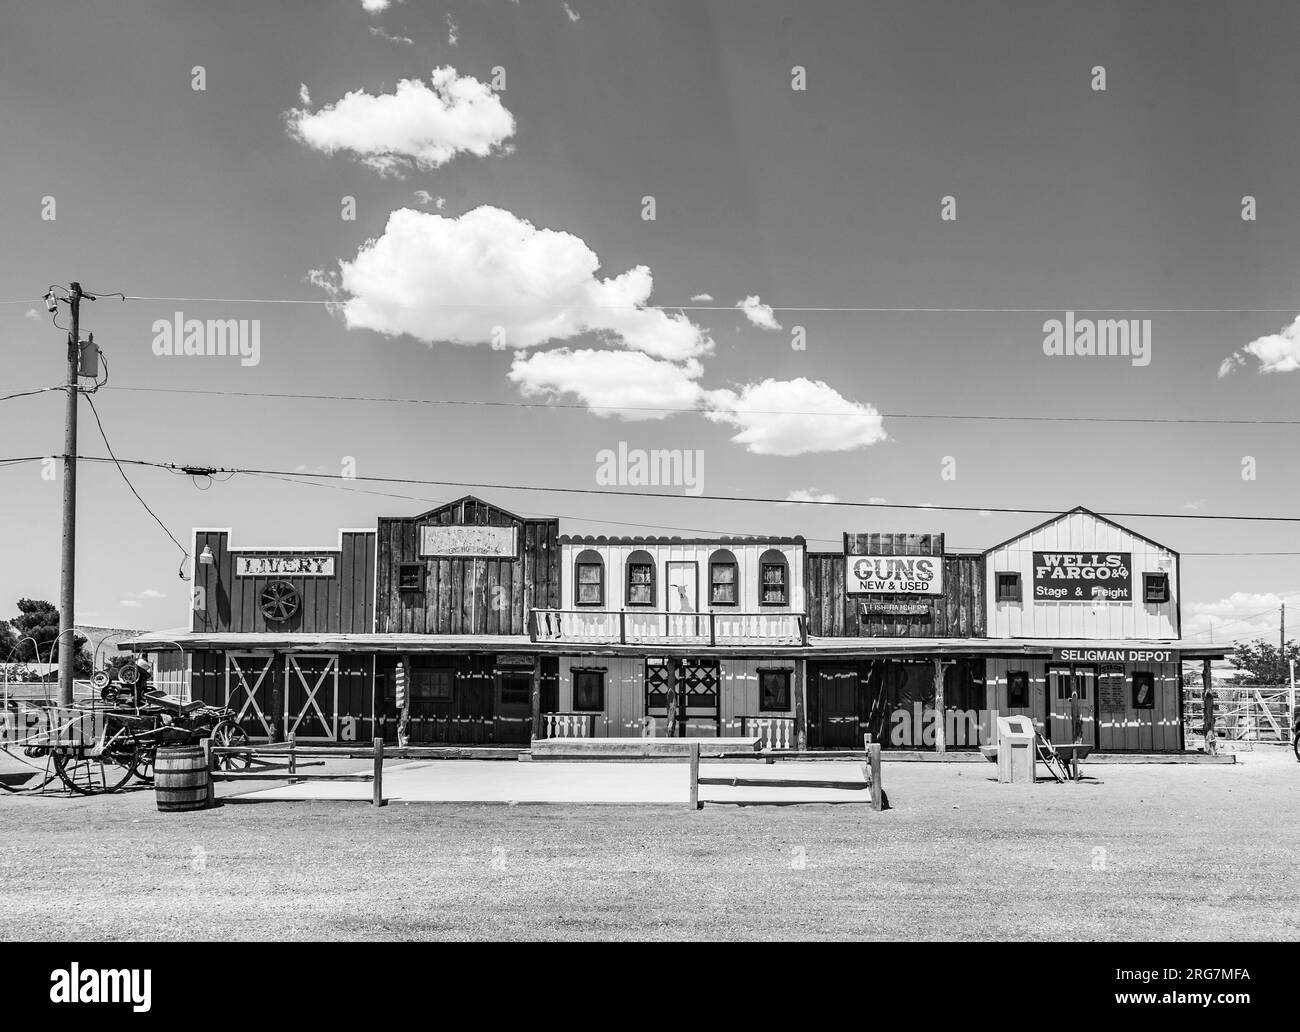 Seligman, USA - July 8, 2008: The Historic Seligman depot on historic Route 66 in Seligman, AZ, USA. Built in 1904, today, Seligmans depot is the best Stock Photo